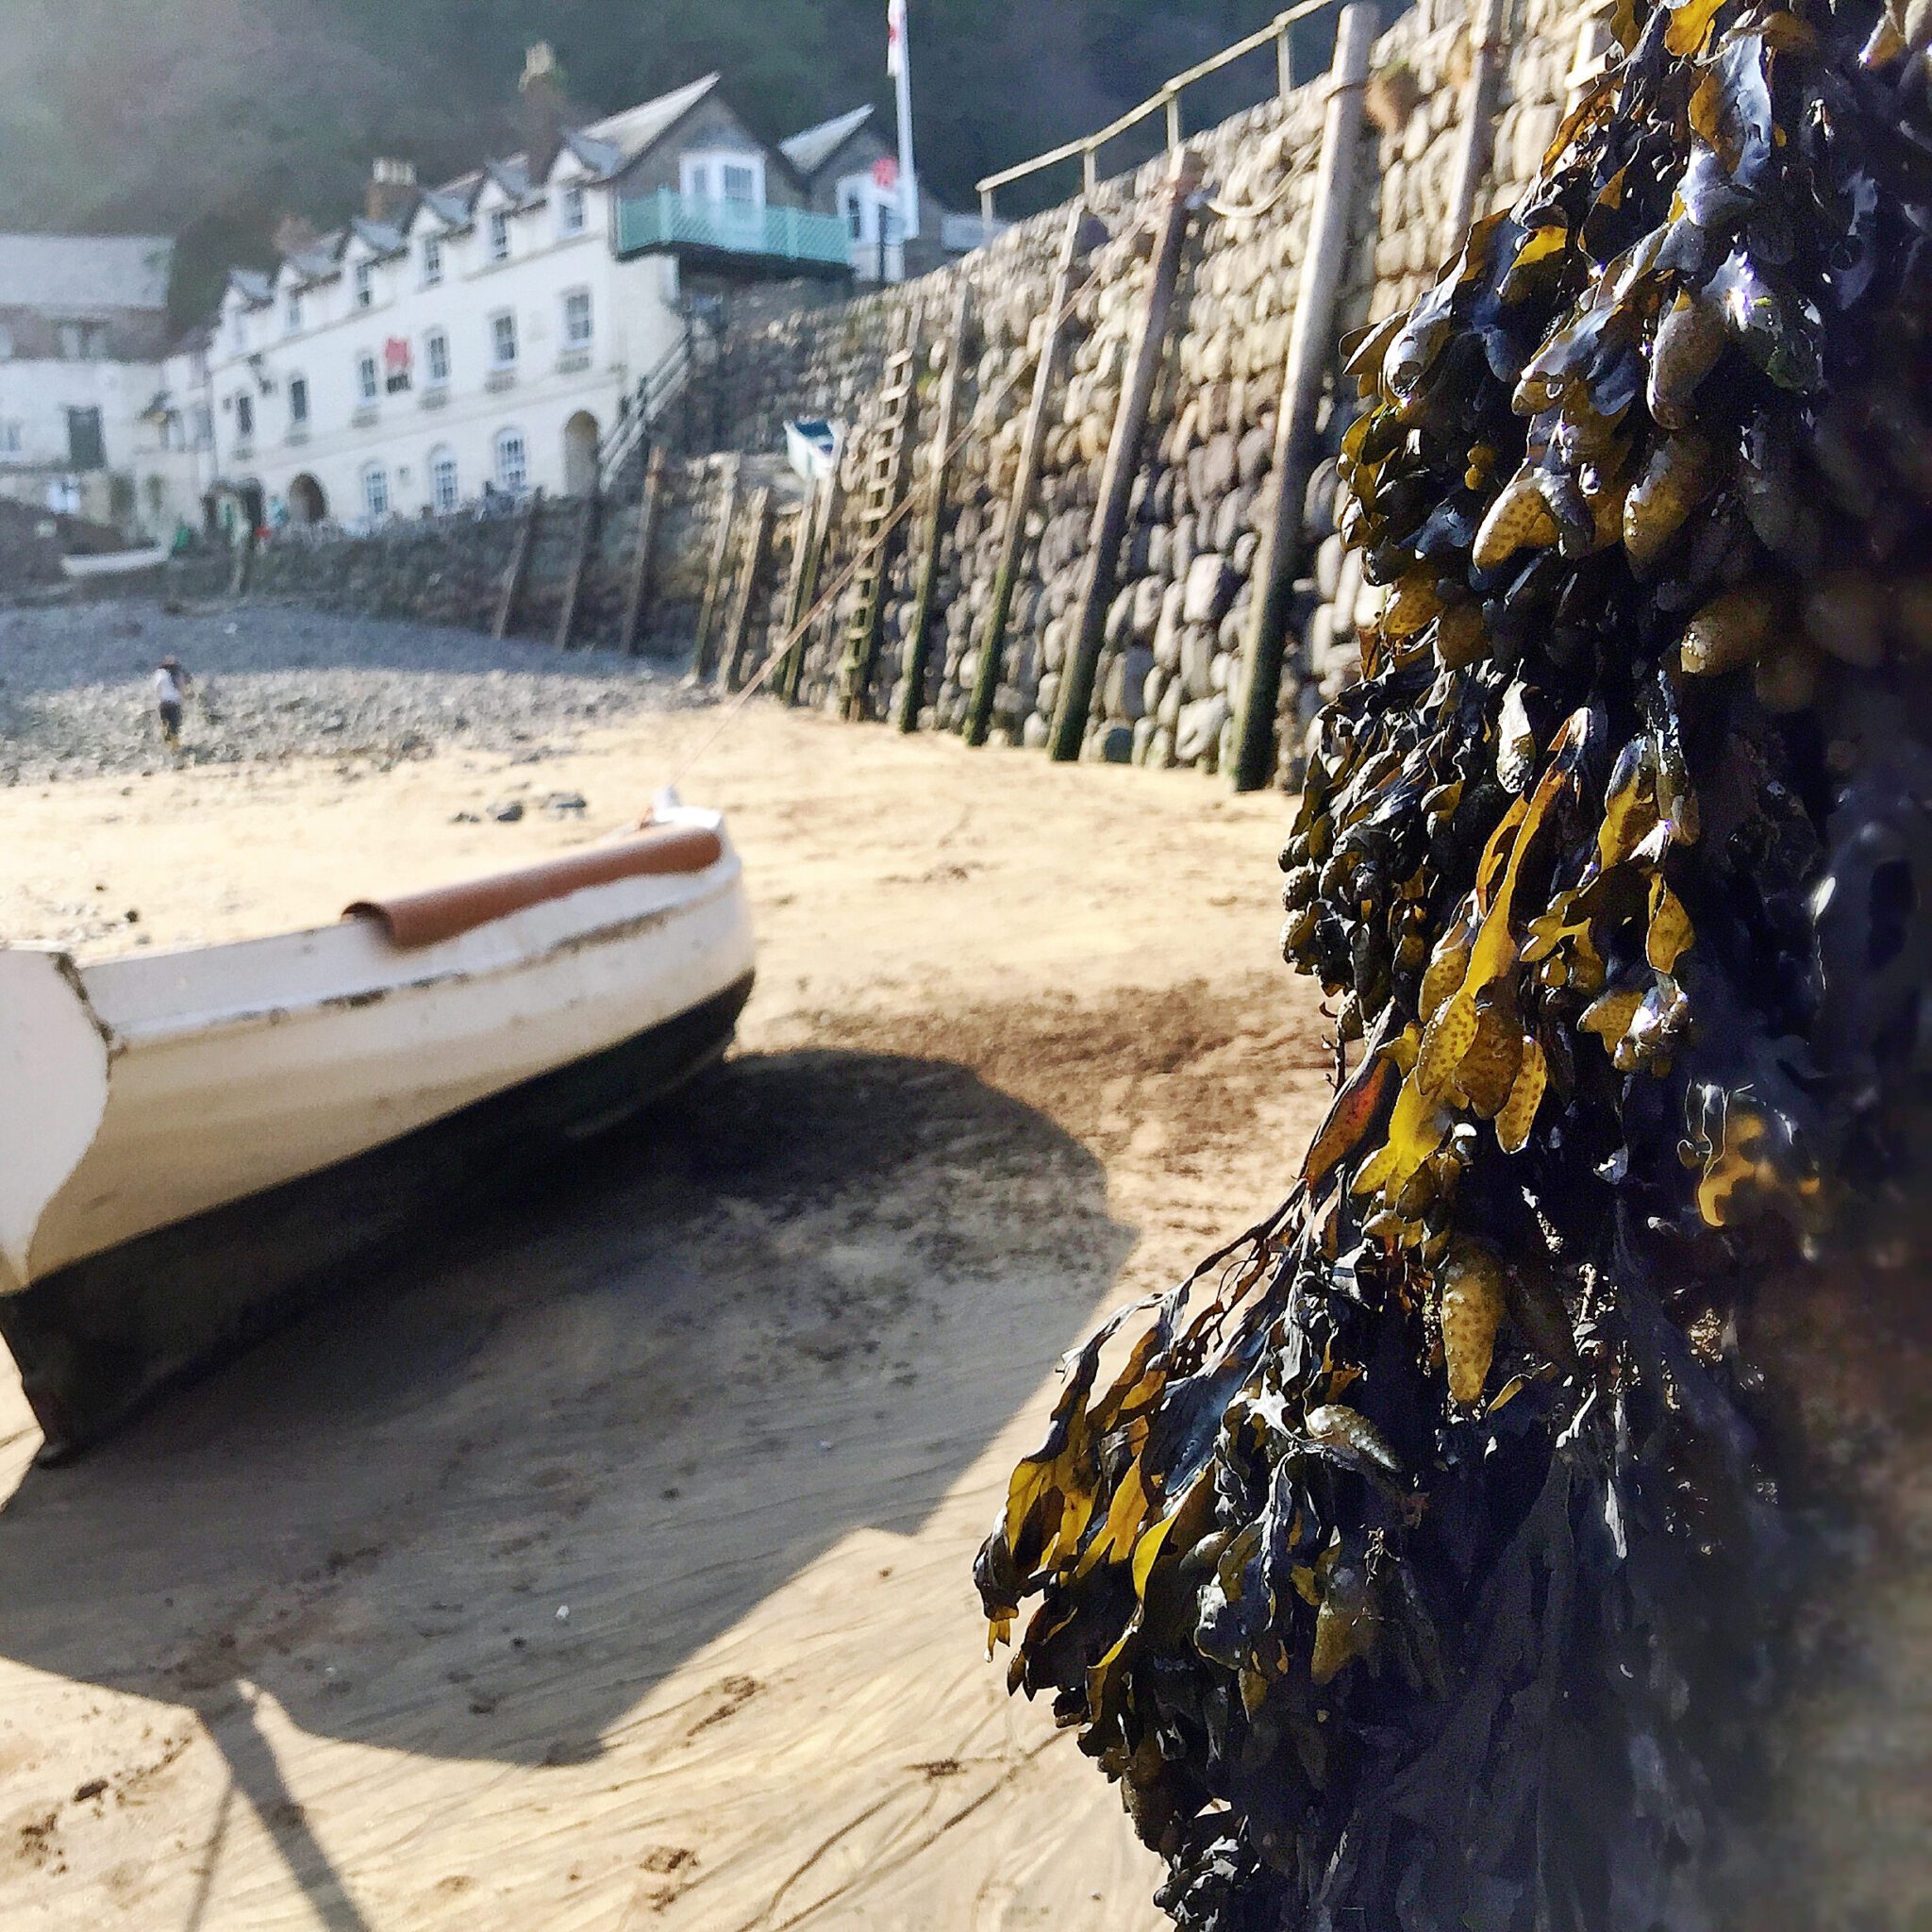 The Clovelly Seaweed Festival